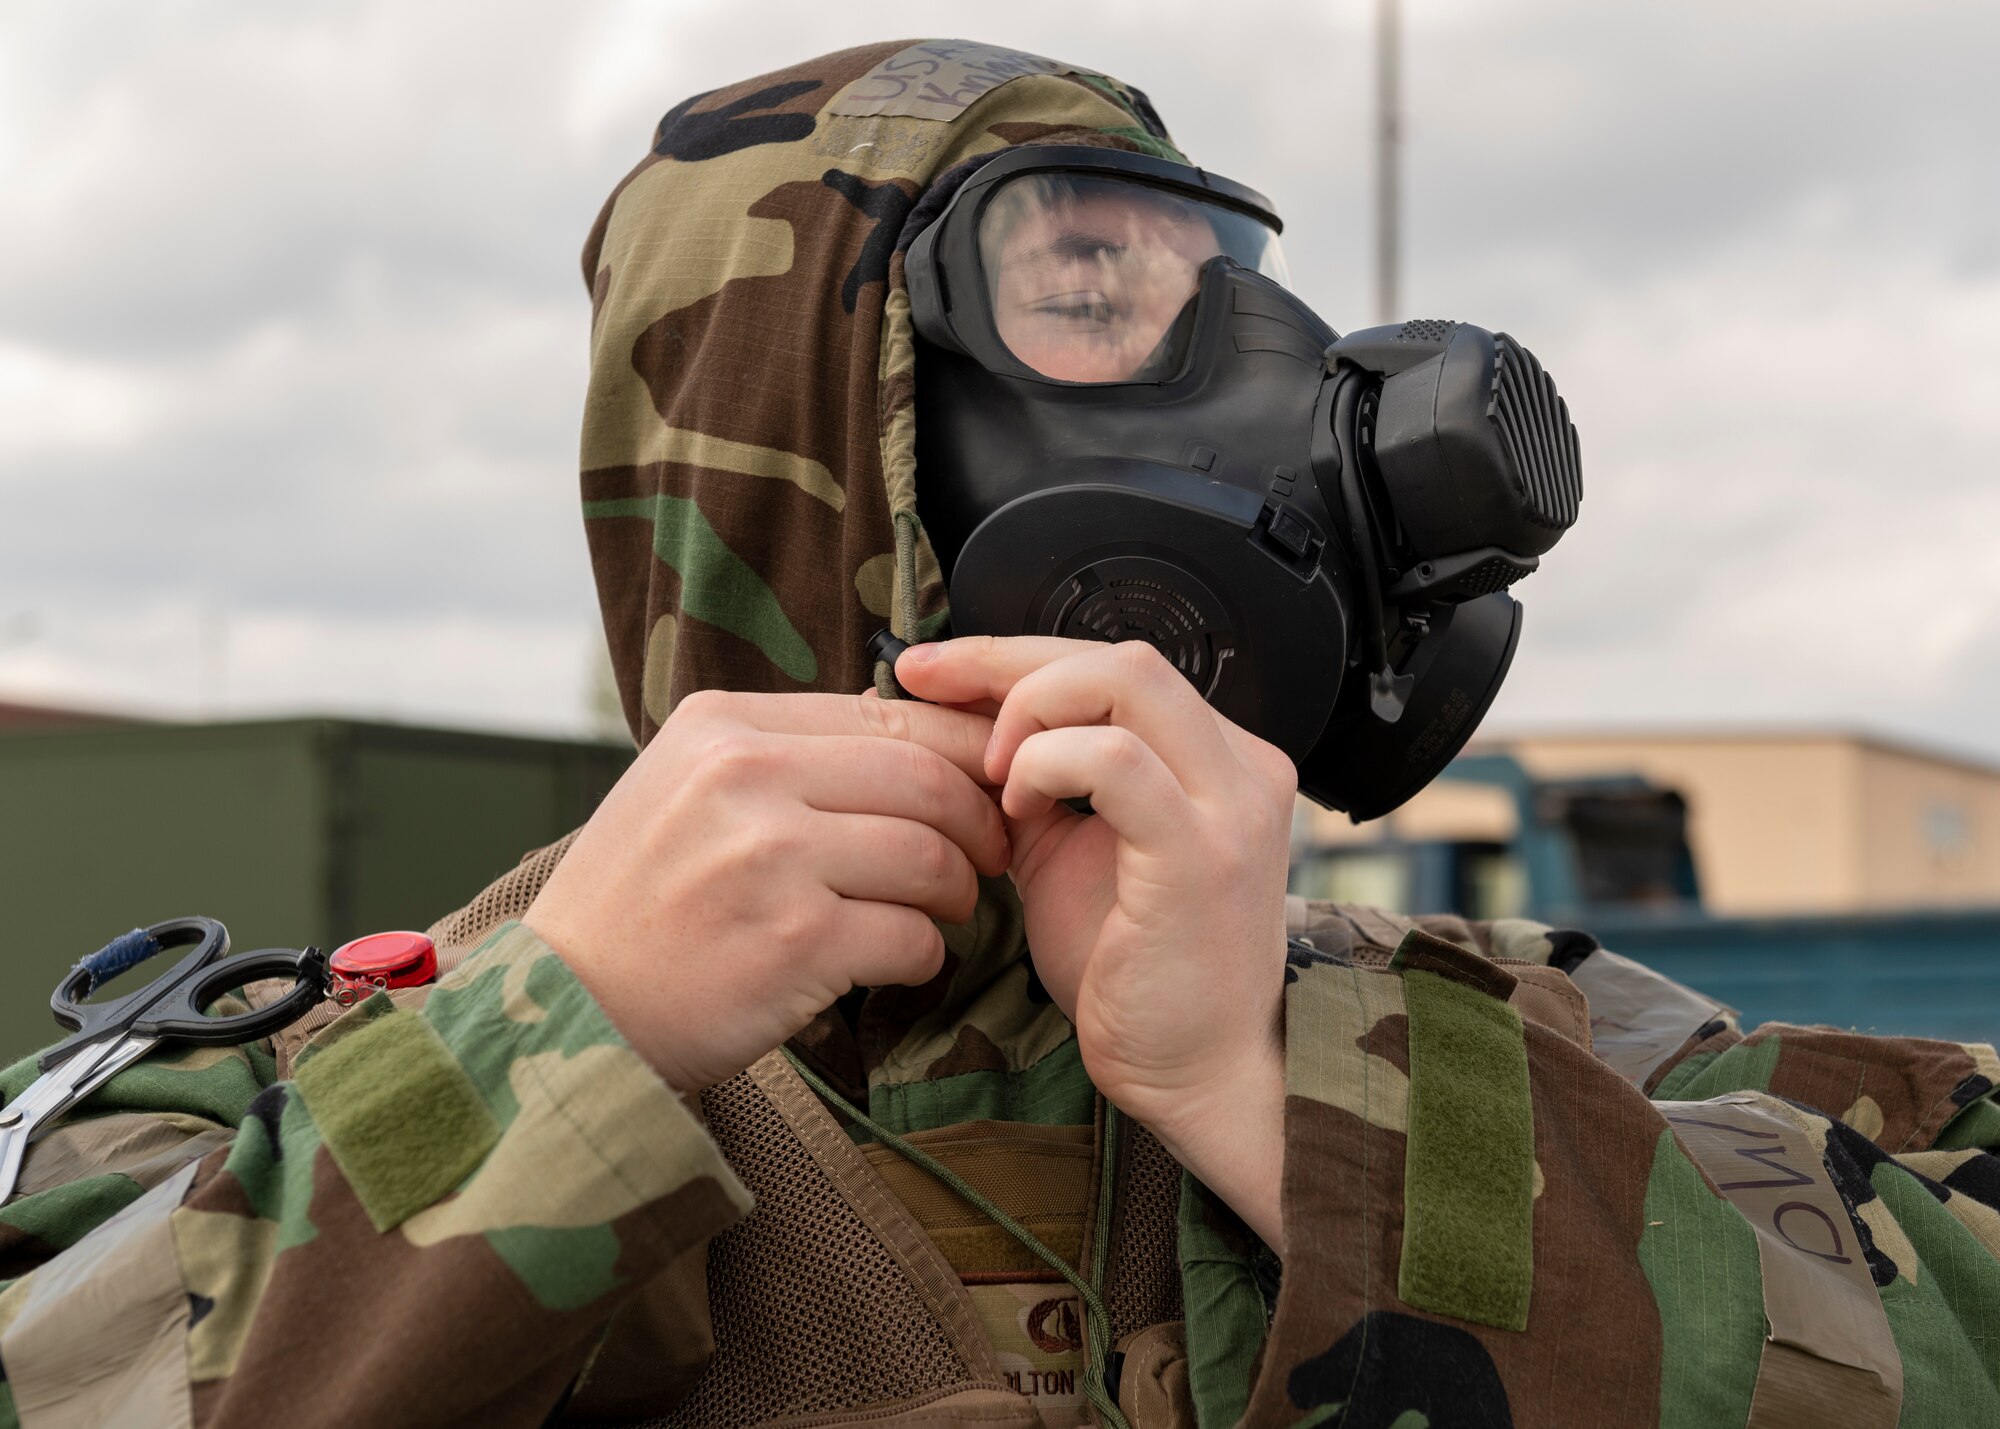 A head shot of an airman donning protective gear